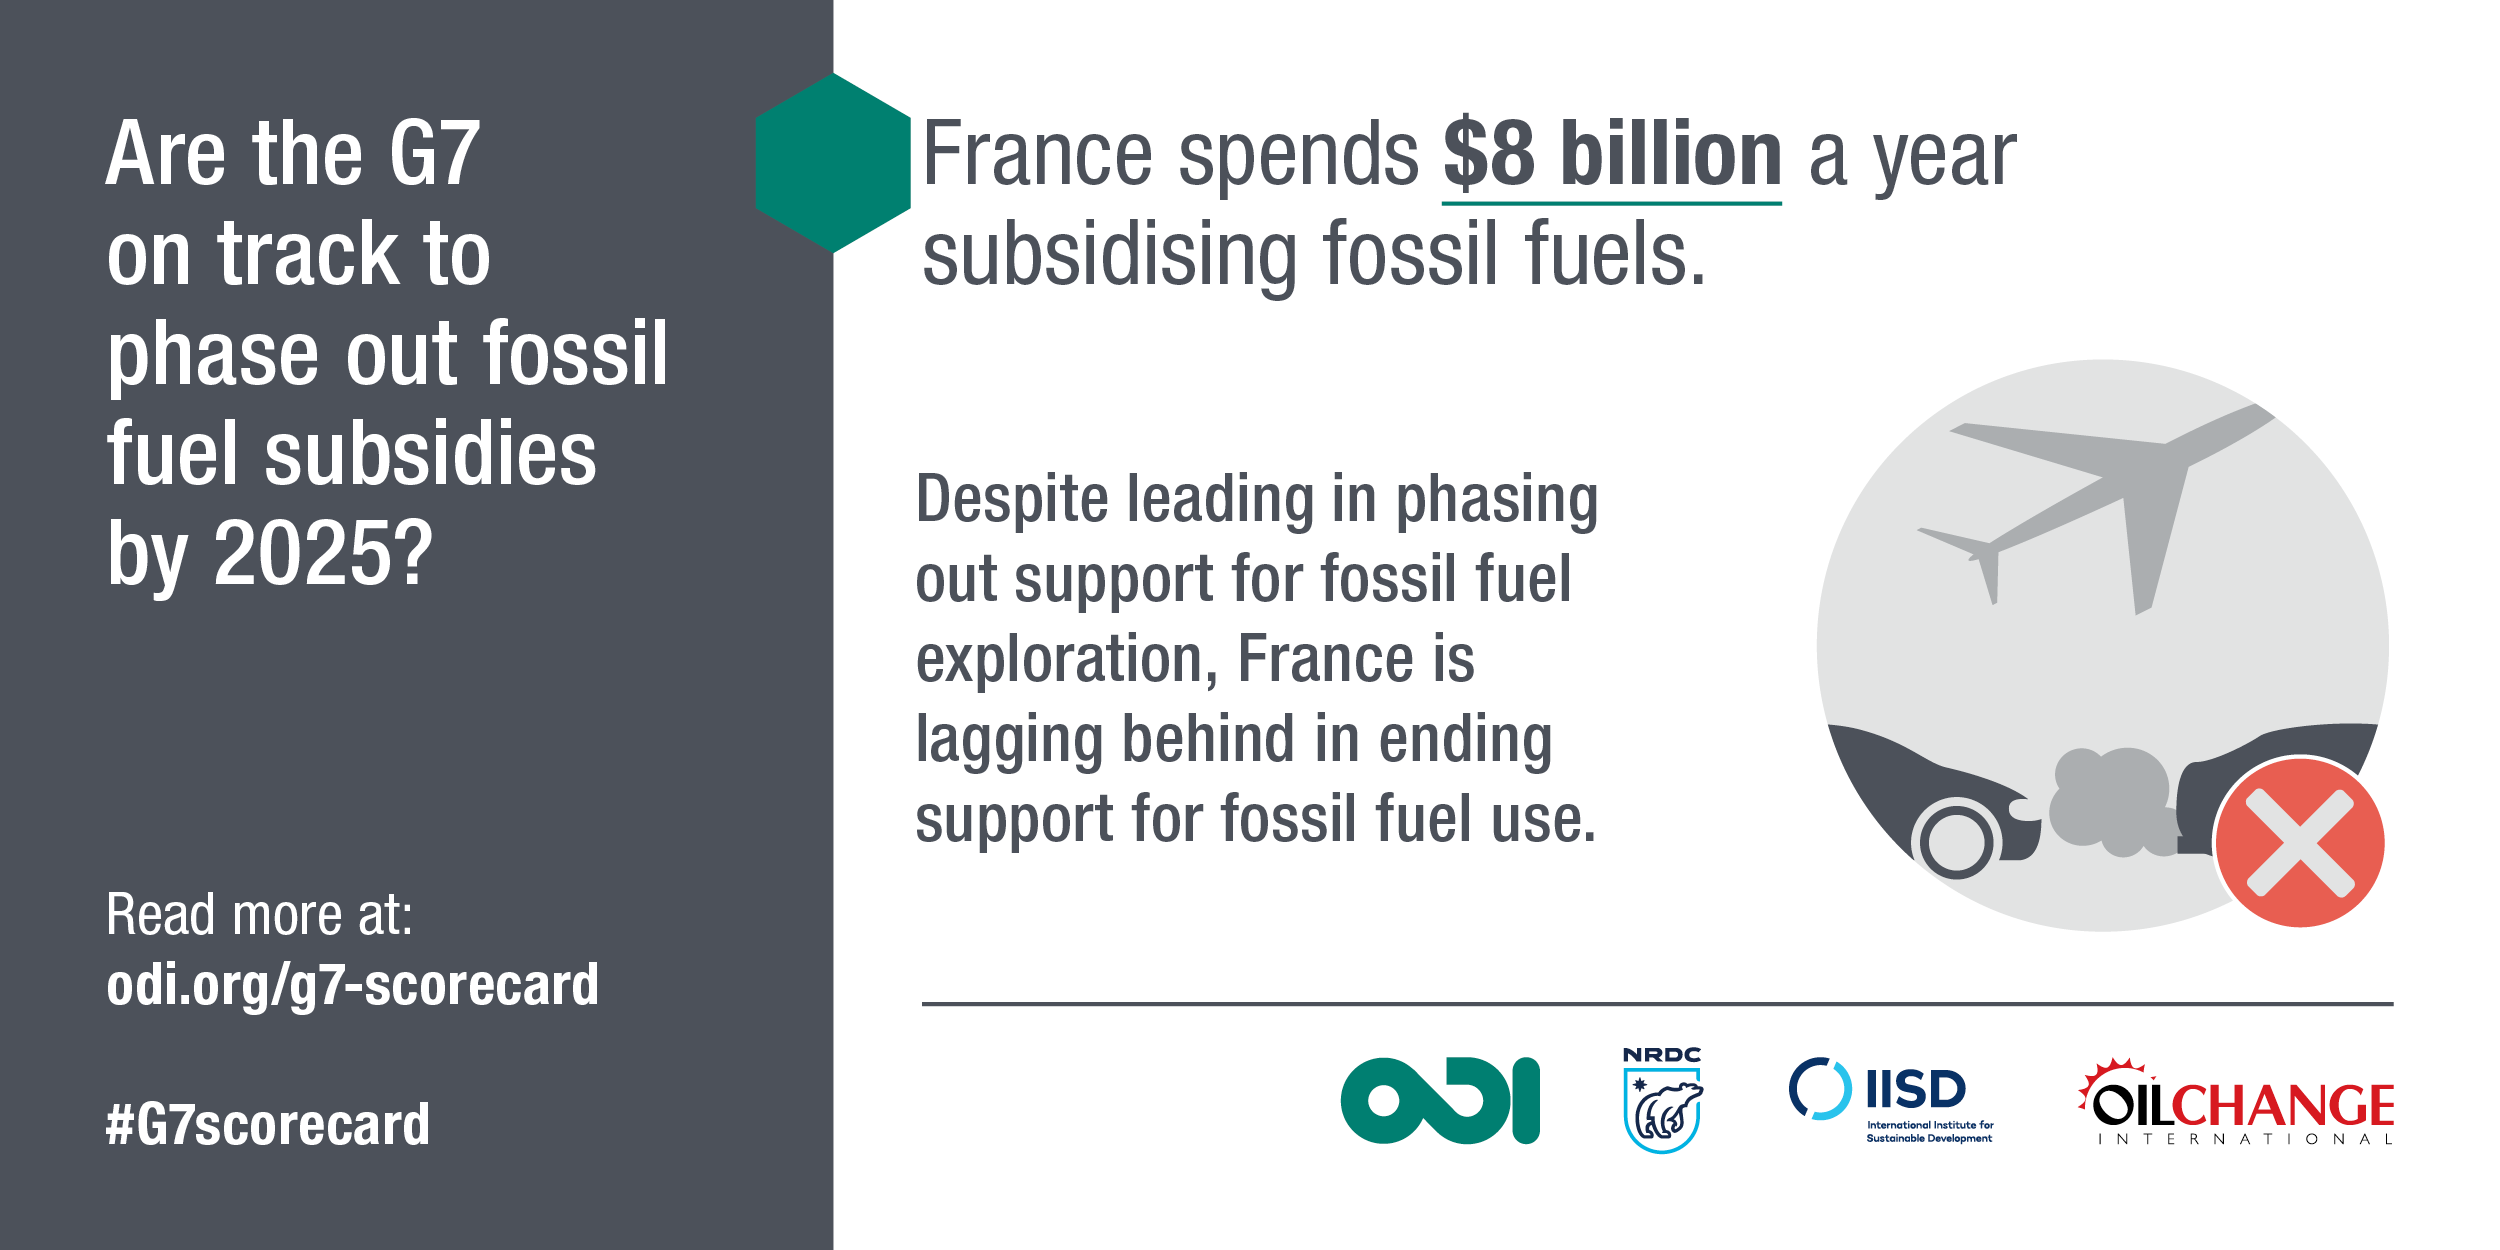 France spends $8 billion a year subsidising fossil fuels. Image: ODI